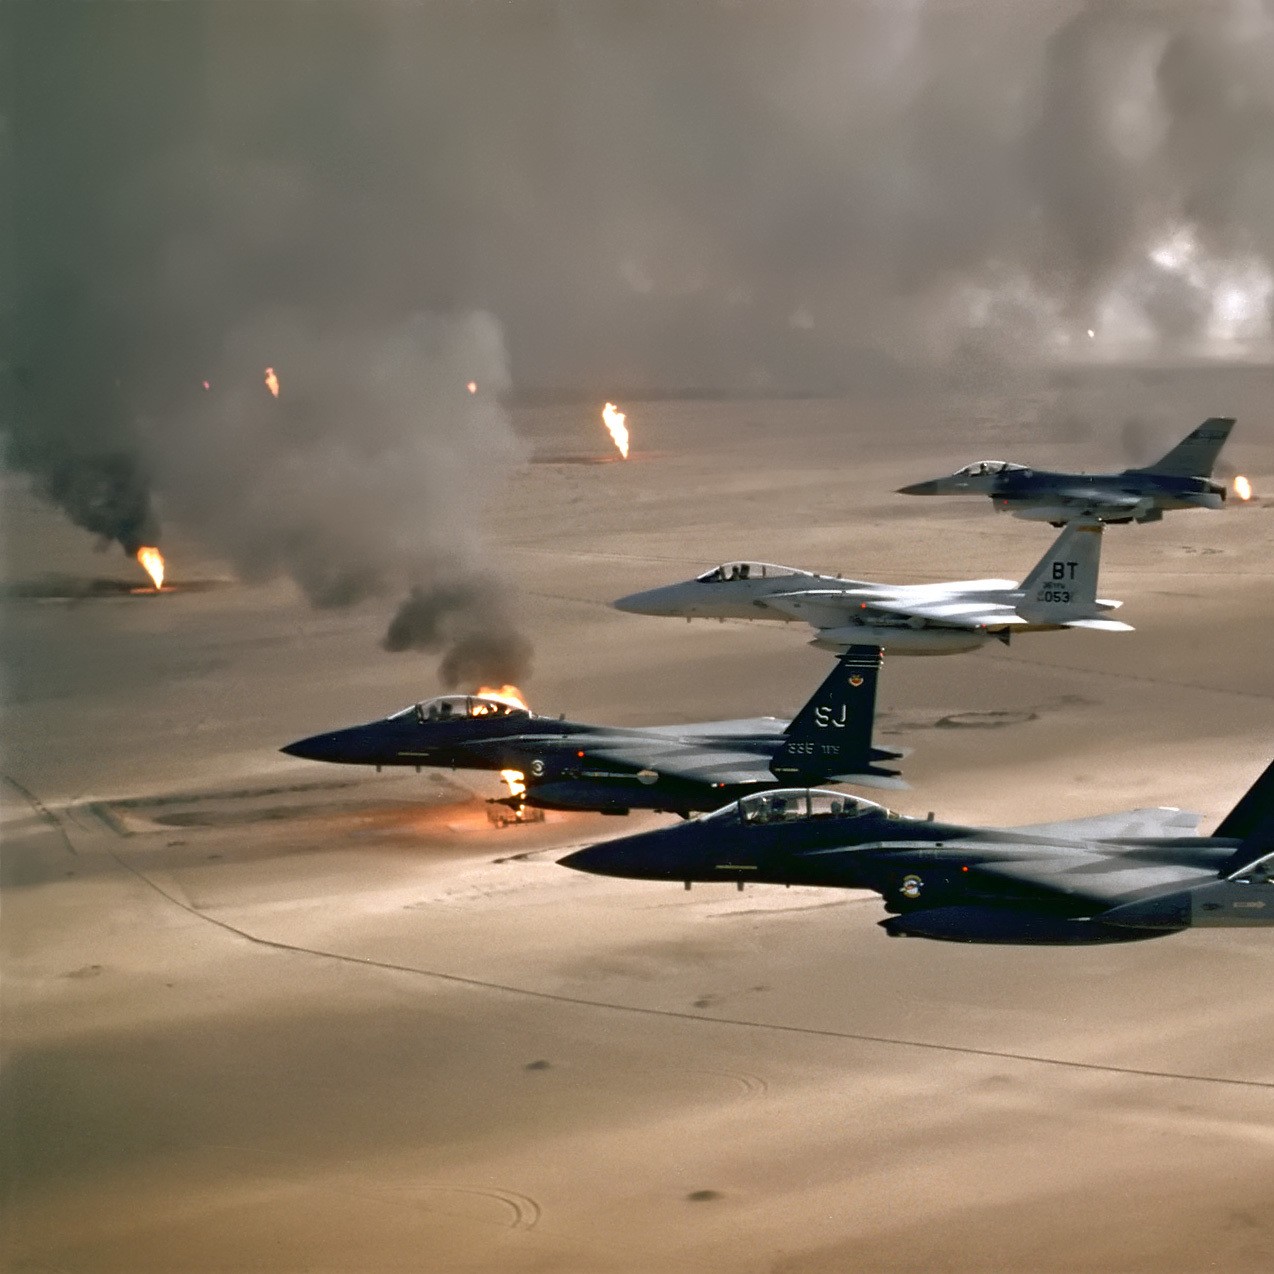 the-us-launched-operation-desert-storm-25-years-ago-and-now-iraq-is-screwed-1452975322.jpg